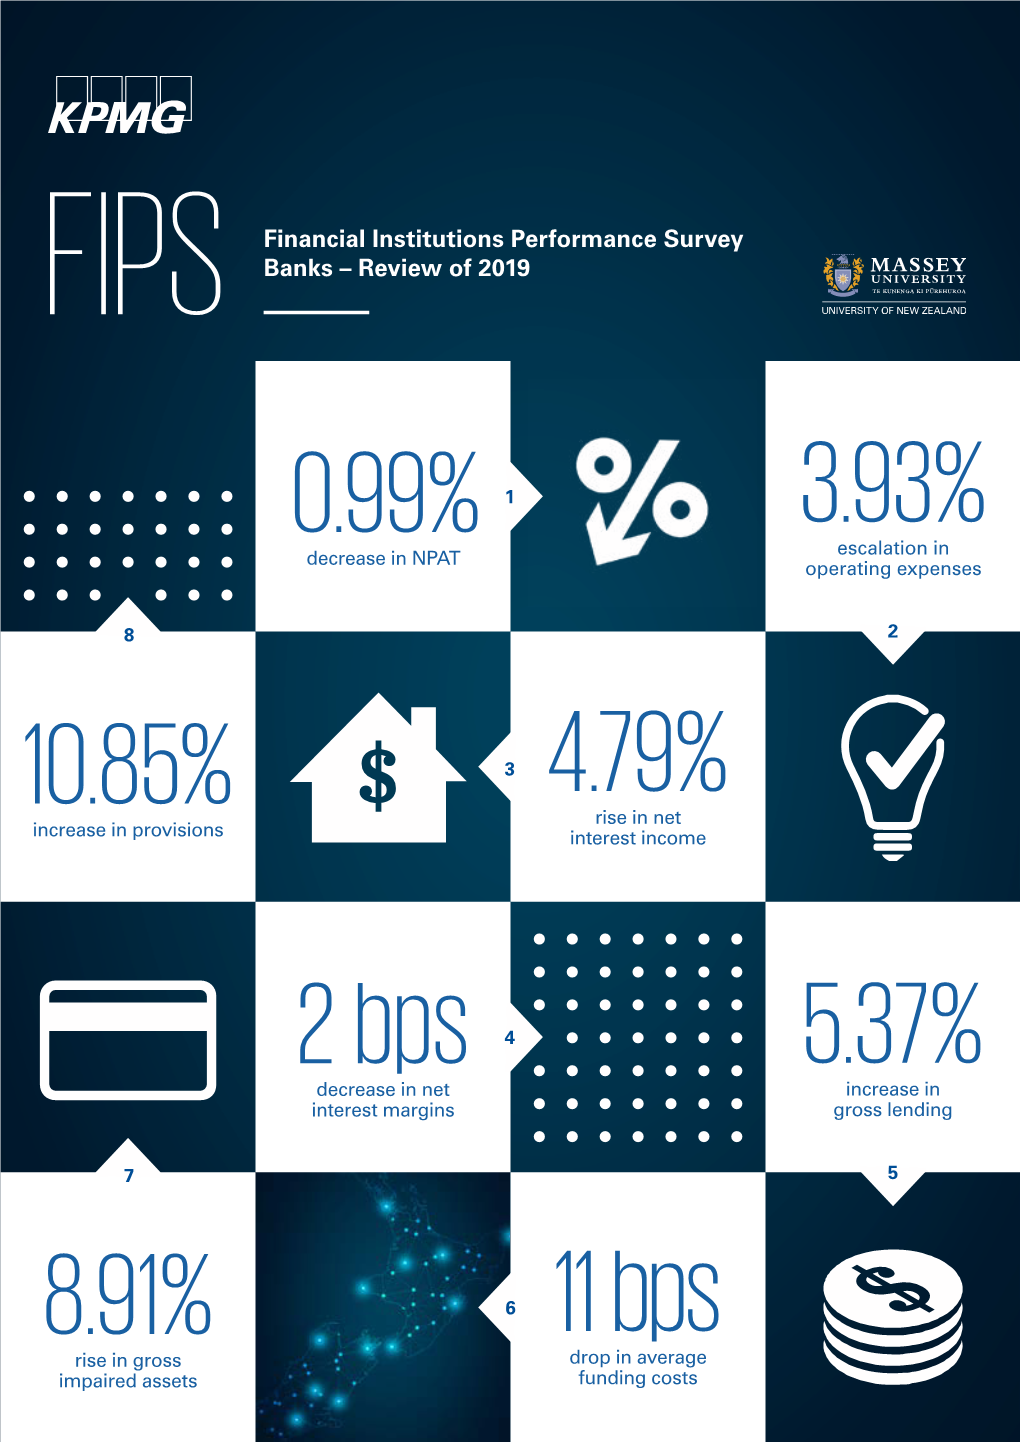 Financial Institutions Performance Survey FIPS Banks – Review of 2019